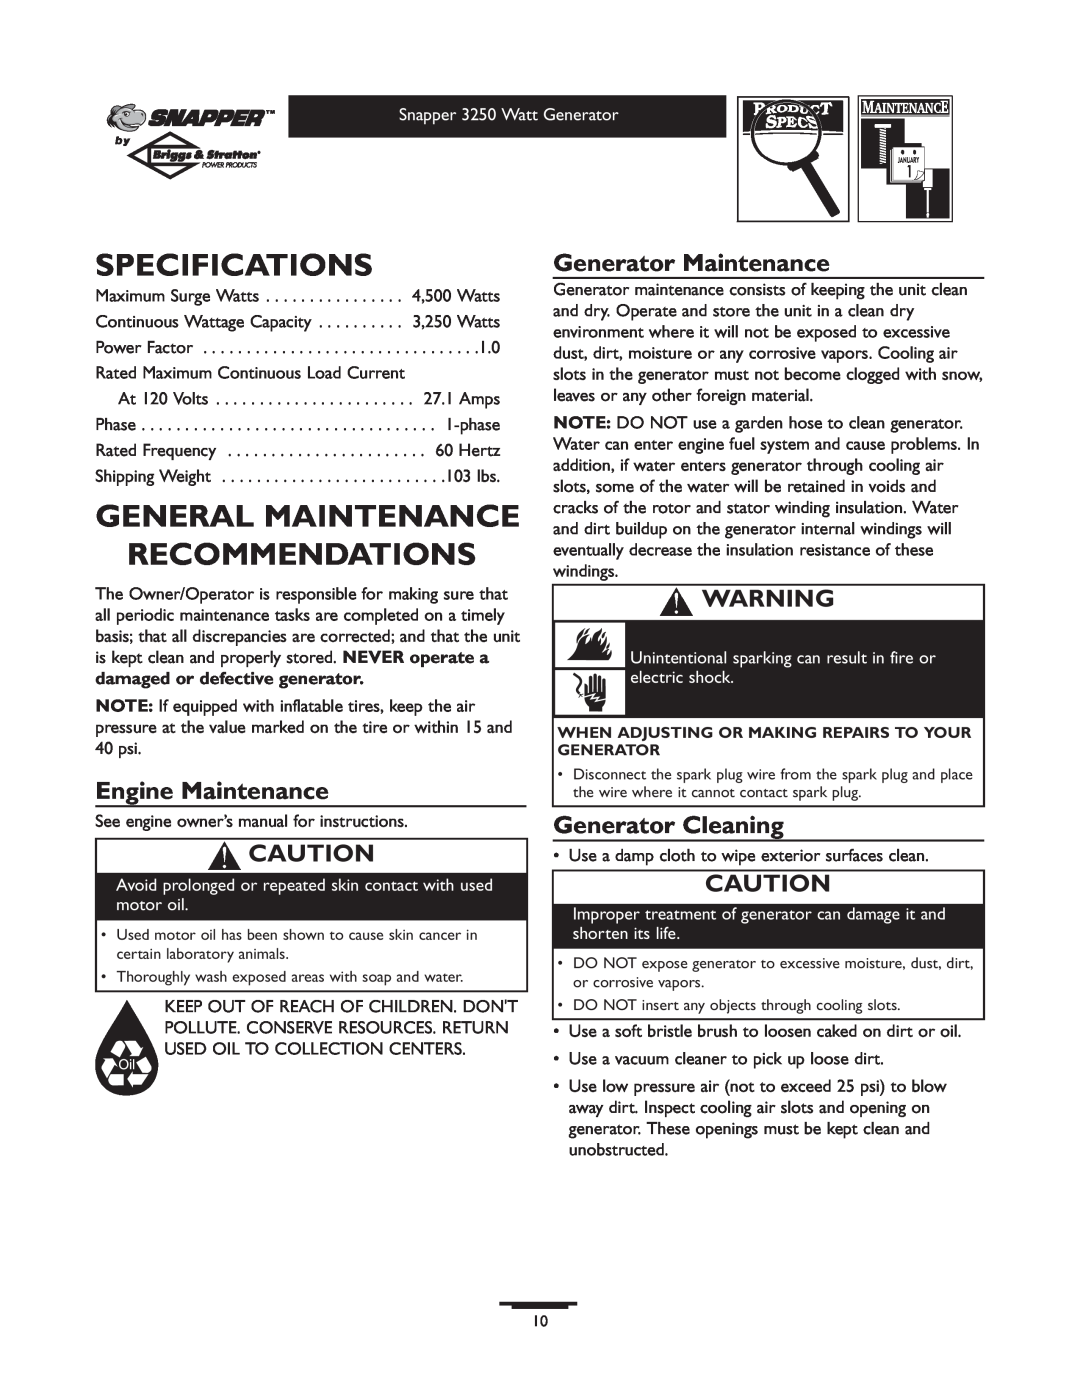 Snapper 3250 owner manual Specifications, General Maintenance Recommendations, Engine Maintenance, Generator Maintenance 